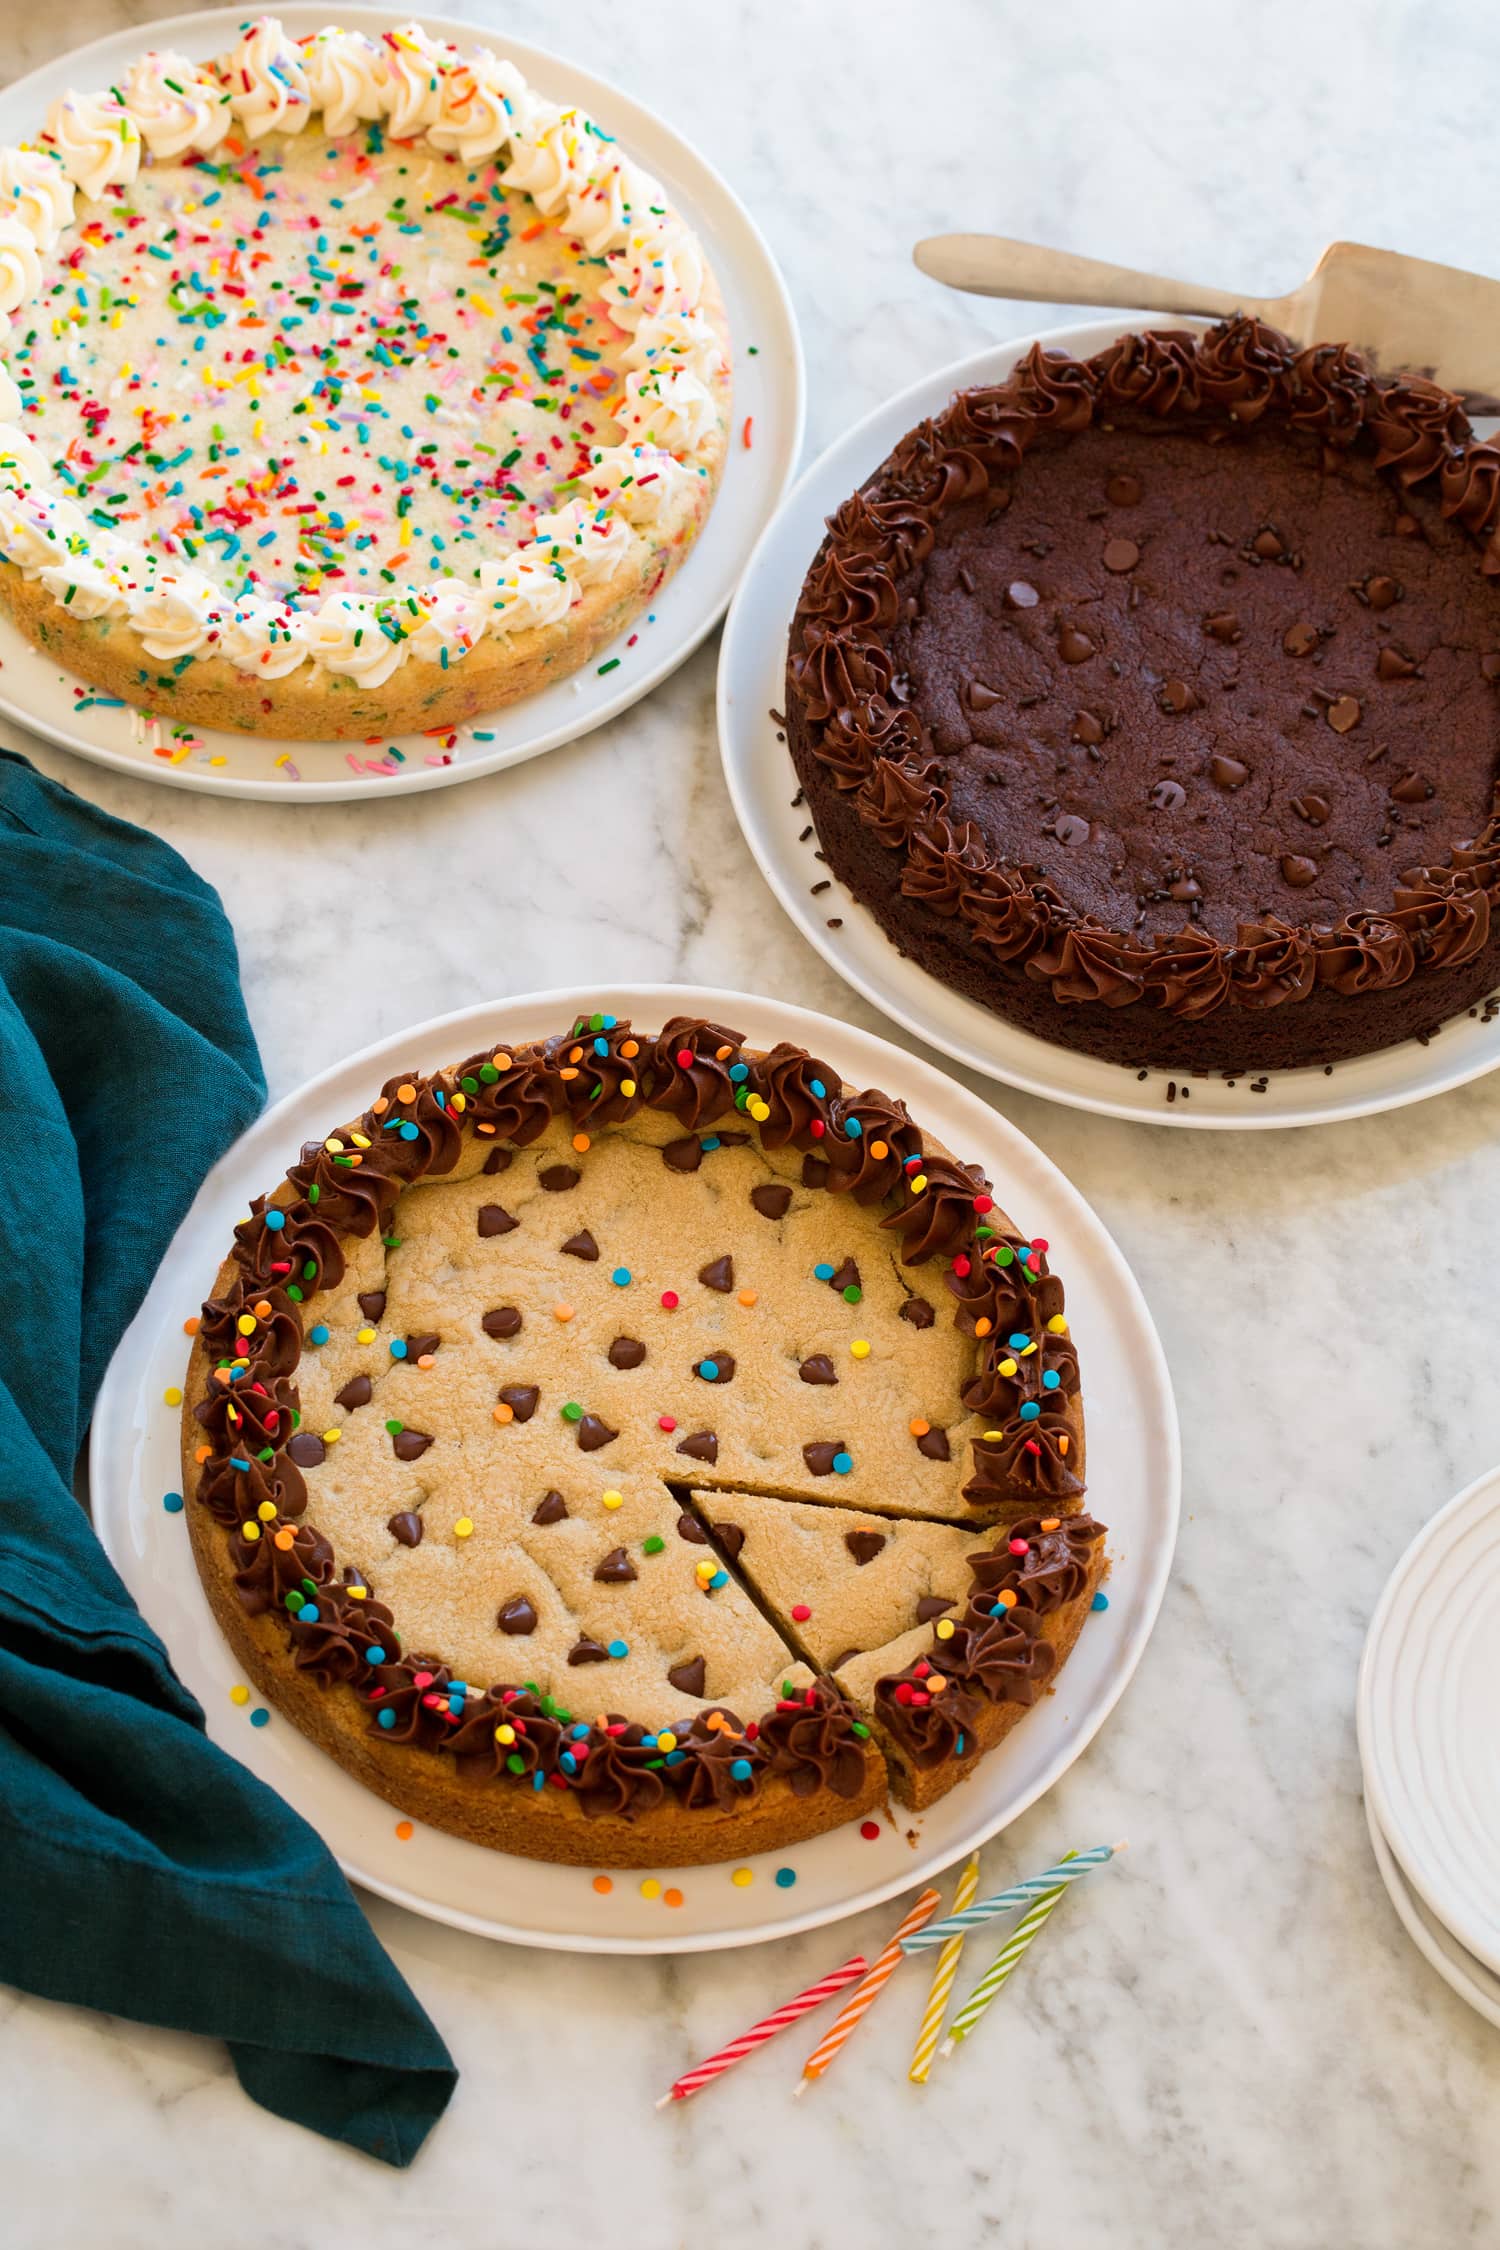 Three homemade cookie cakes. Includes chocolate chip cookie flavor, double chocolate, and funfetti.